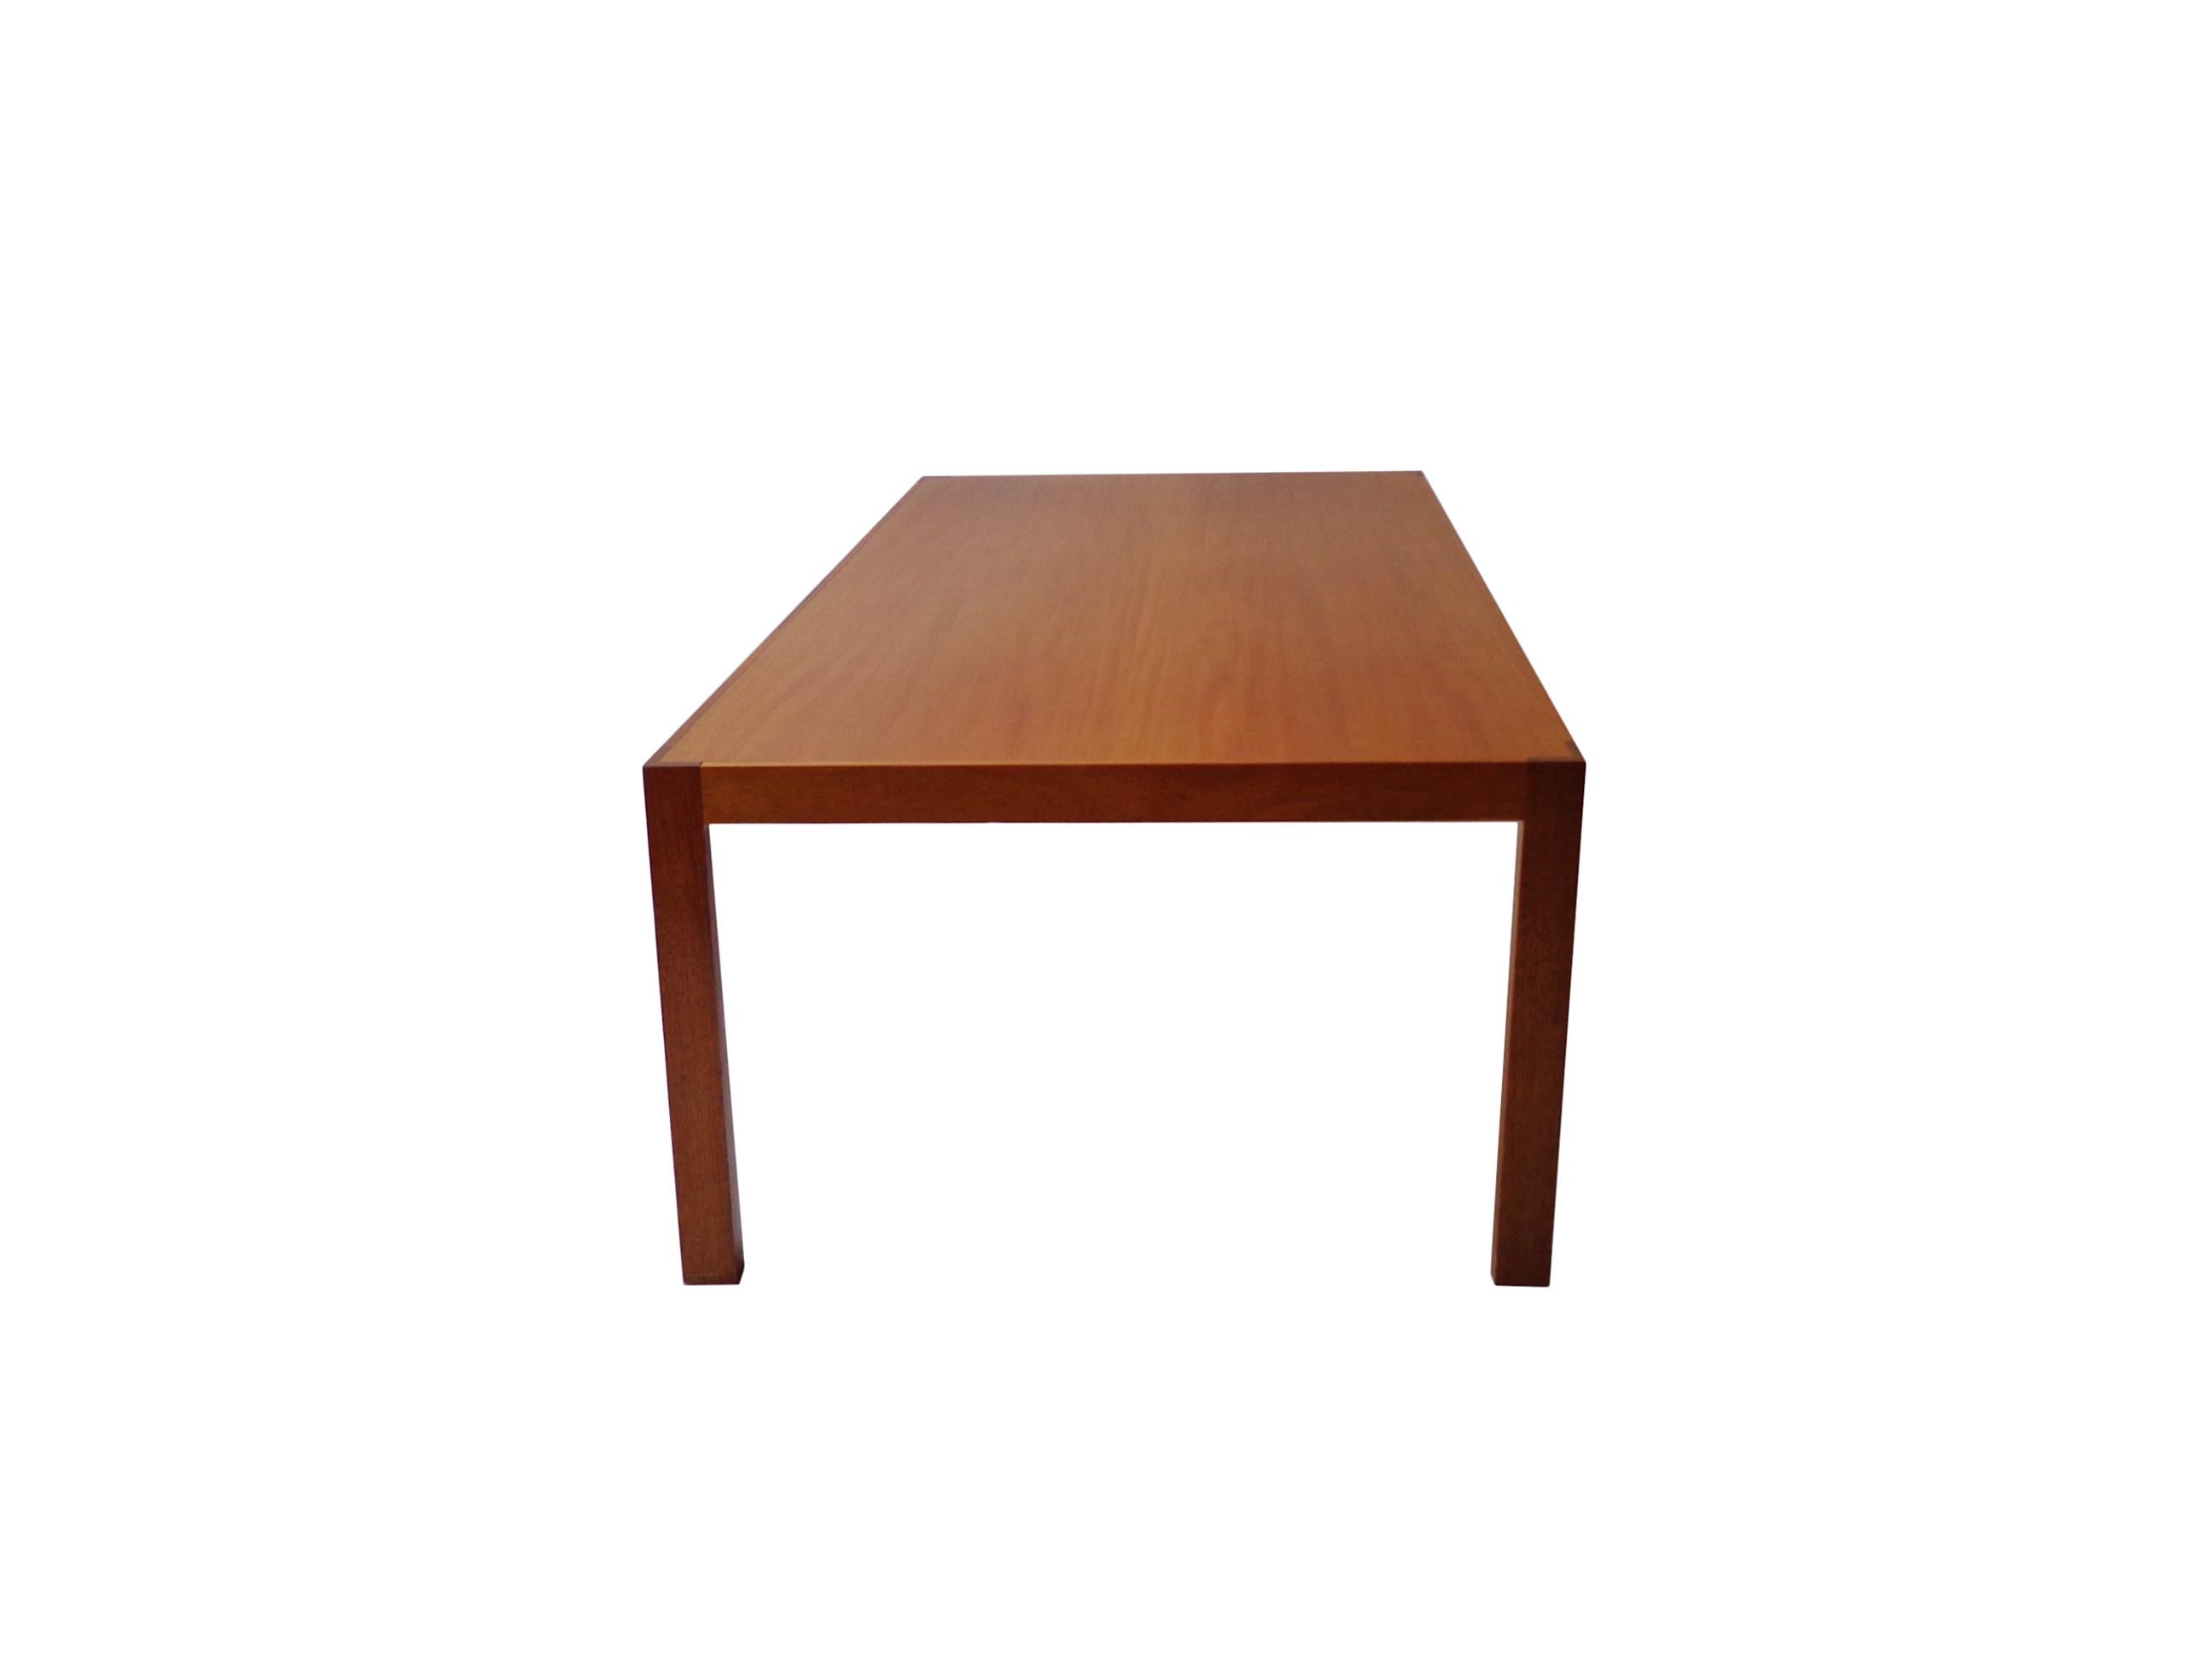 Late 20th Century Rud Thygesen and Johnny Sørensen Coffee-Sofa Table in Mahogany, 1970s, Danish For Sale